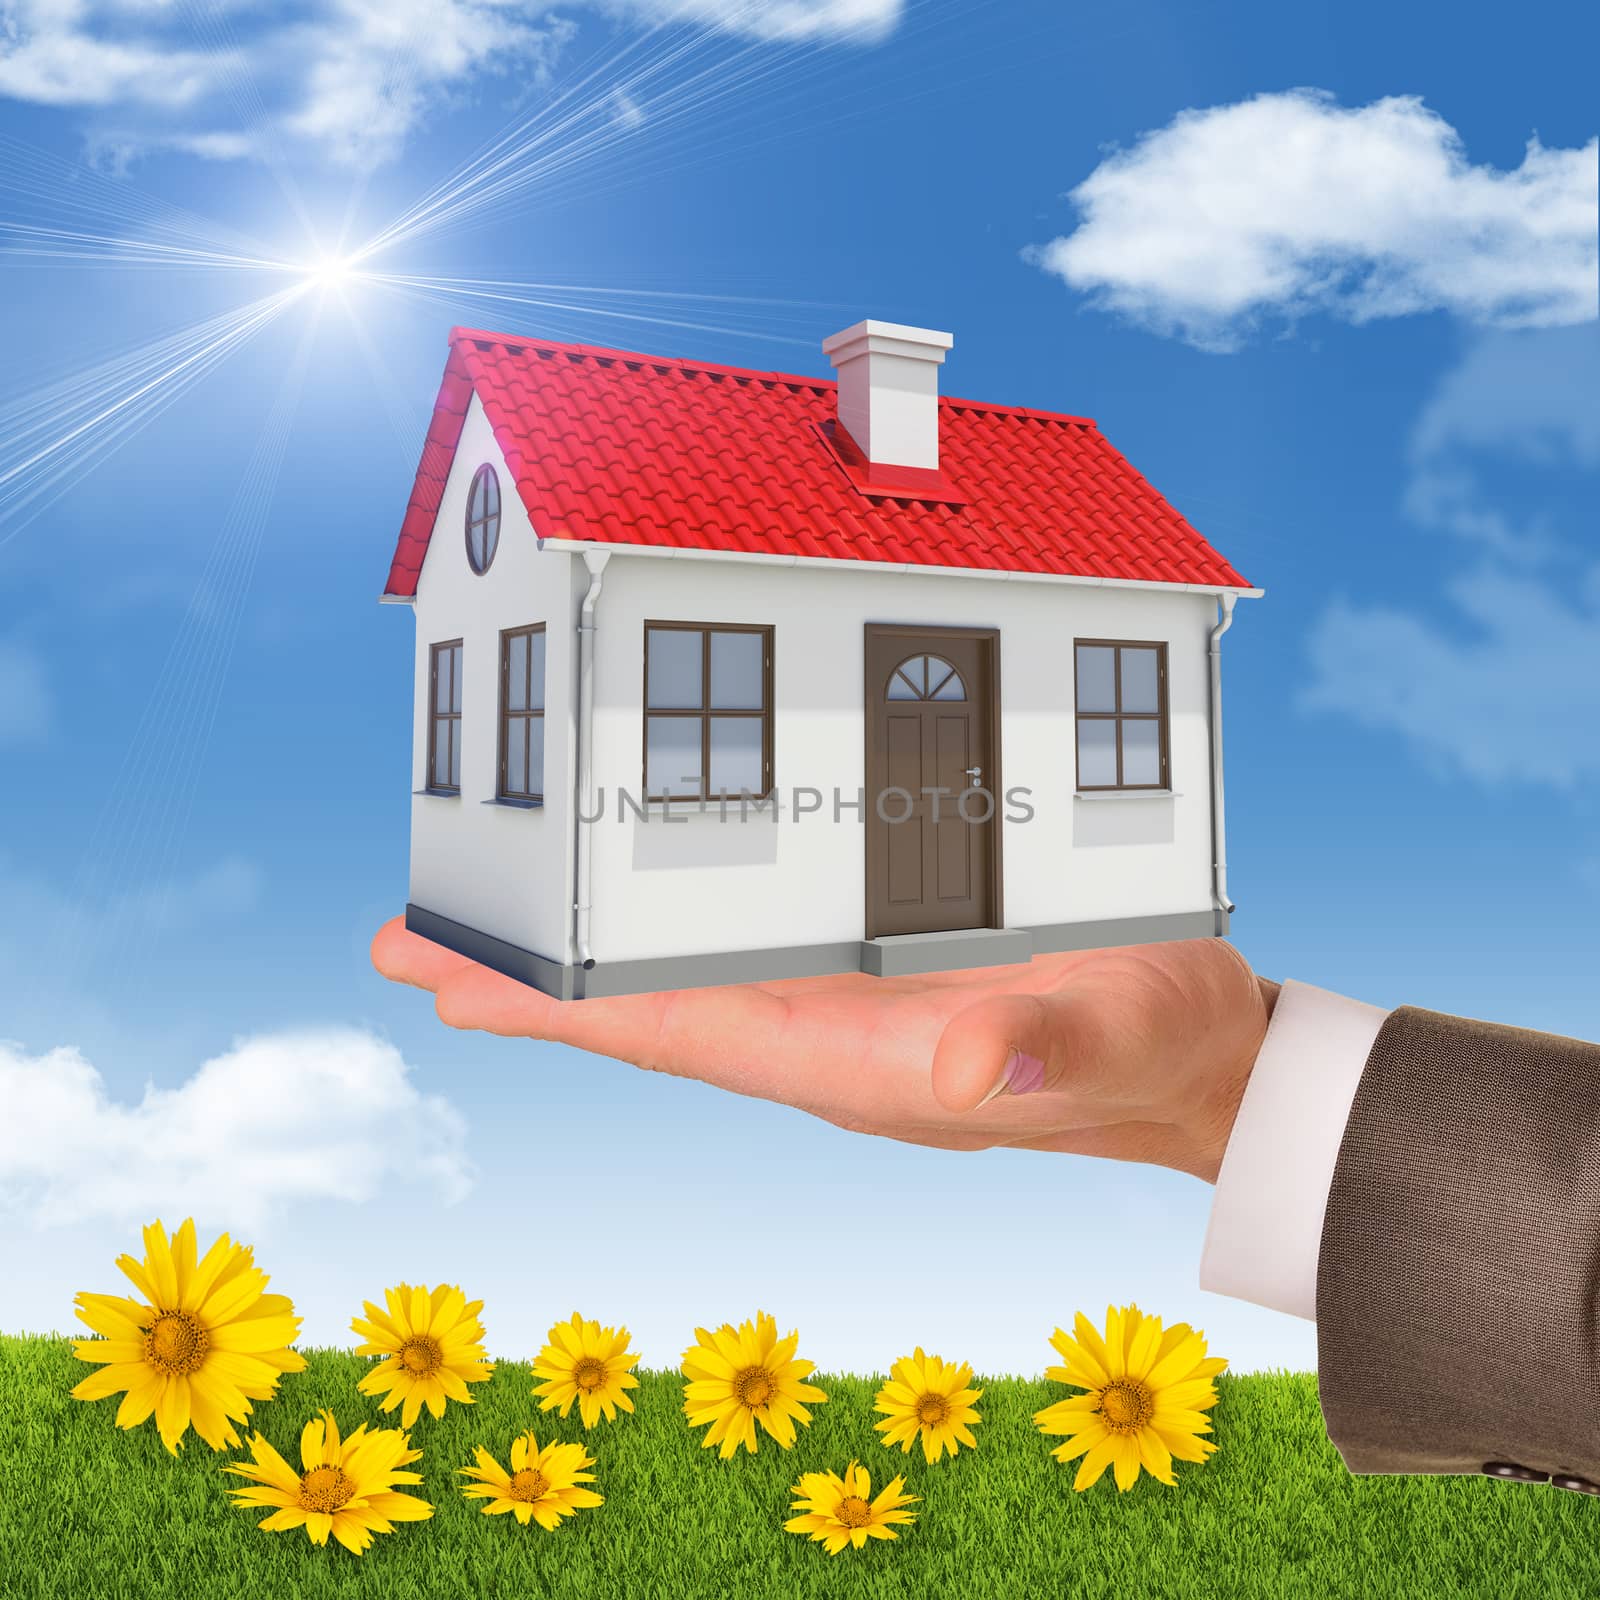 House in mans hand on nature background with flowers